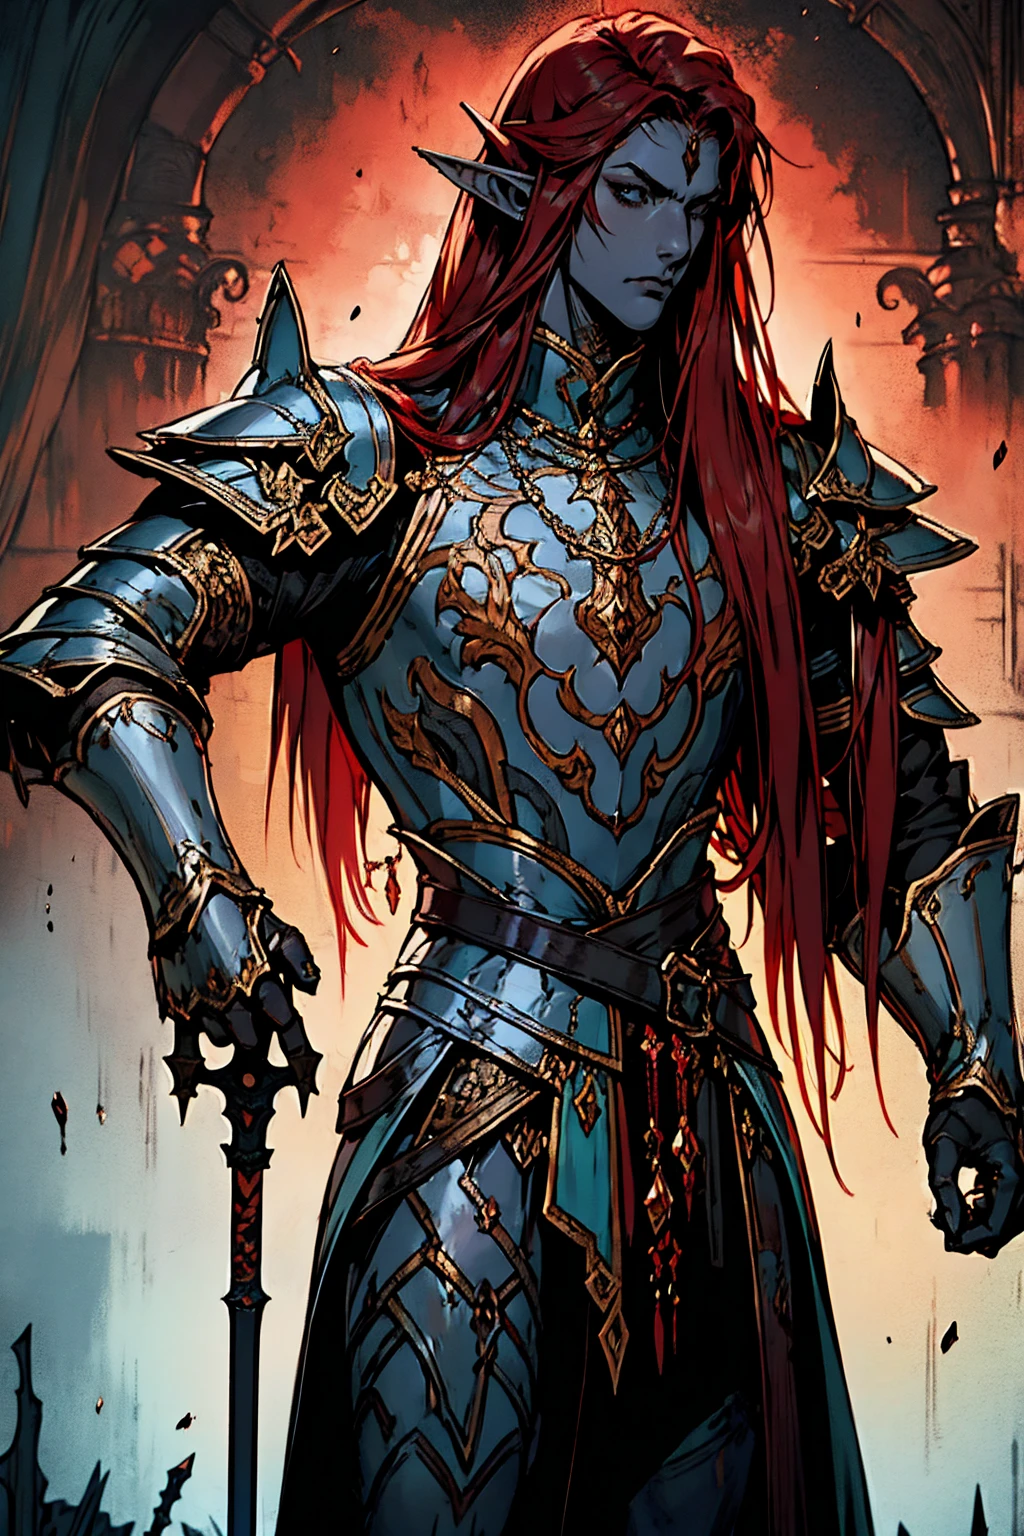 work of art, best qualityer, 1 men, grown-up, male focus, standing alone, red hair, long hair, vibrant green eyes, gray skin, dark elf, ebony plus, dark elf, heavy armor, male, cloak, darkskin, war cry, Fantasy aesthetic, highy detailed, shadowverse style, elf ear, elf knight armor. Holding Chinese halberd, going, writing, lying down, standing, on your back, fighting, dynamic poses. Get ready to dive into a world where beauty and craftsmanship merge perfectly